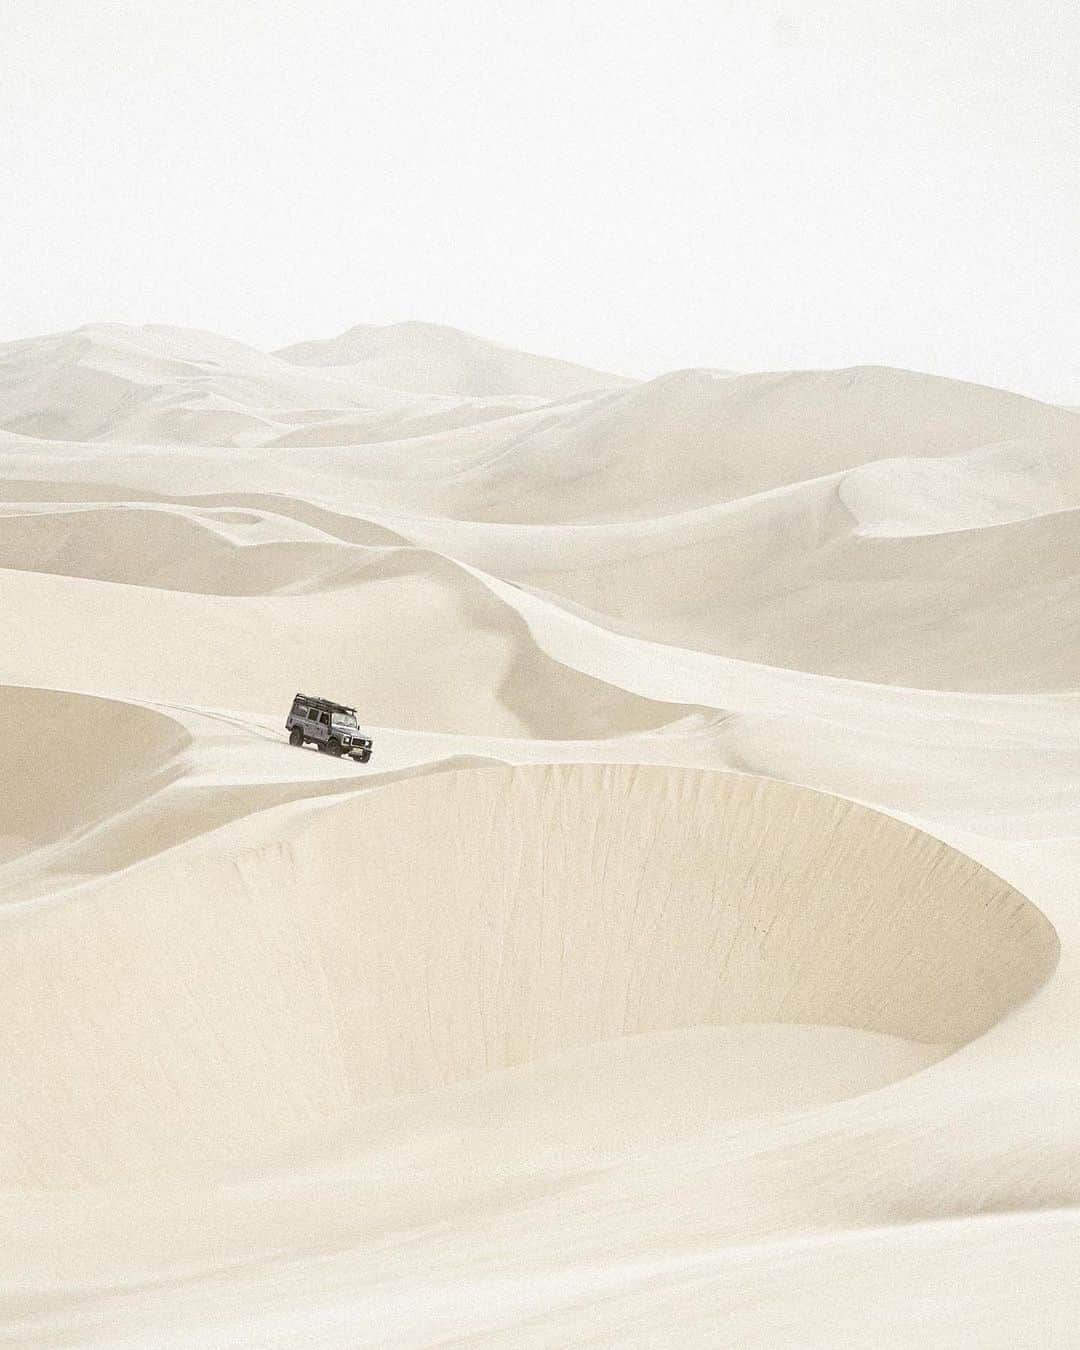 Canon Photographyのインスタグラム：「Dunes on dunes on dunes 📸   A highlight from our trip in Namibia, and honestly one of the most beautiful landscapes I’ve ever laid eyes on.   One minute totally surrounded by sand, the next cruising alongside the Atlantic, flamingos an arm’s length away! Unforgettable 🦩  Carousel by @jeffreyjkieffer  Curated by @rupertporpora  . . . . . . . #earth #dunes #sanddunes #minimalist #minimalism #composition #earthmood #landscapephotography #softaesthetic」